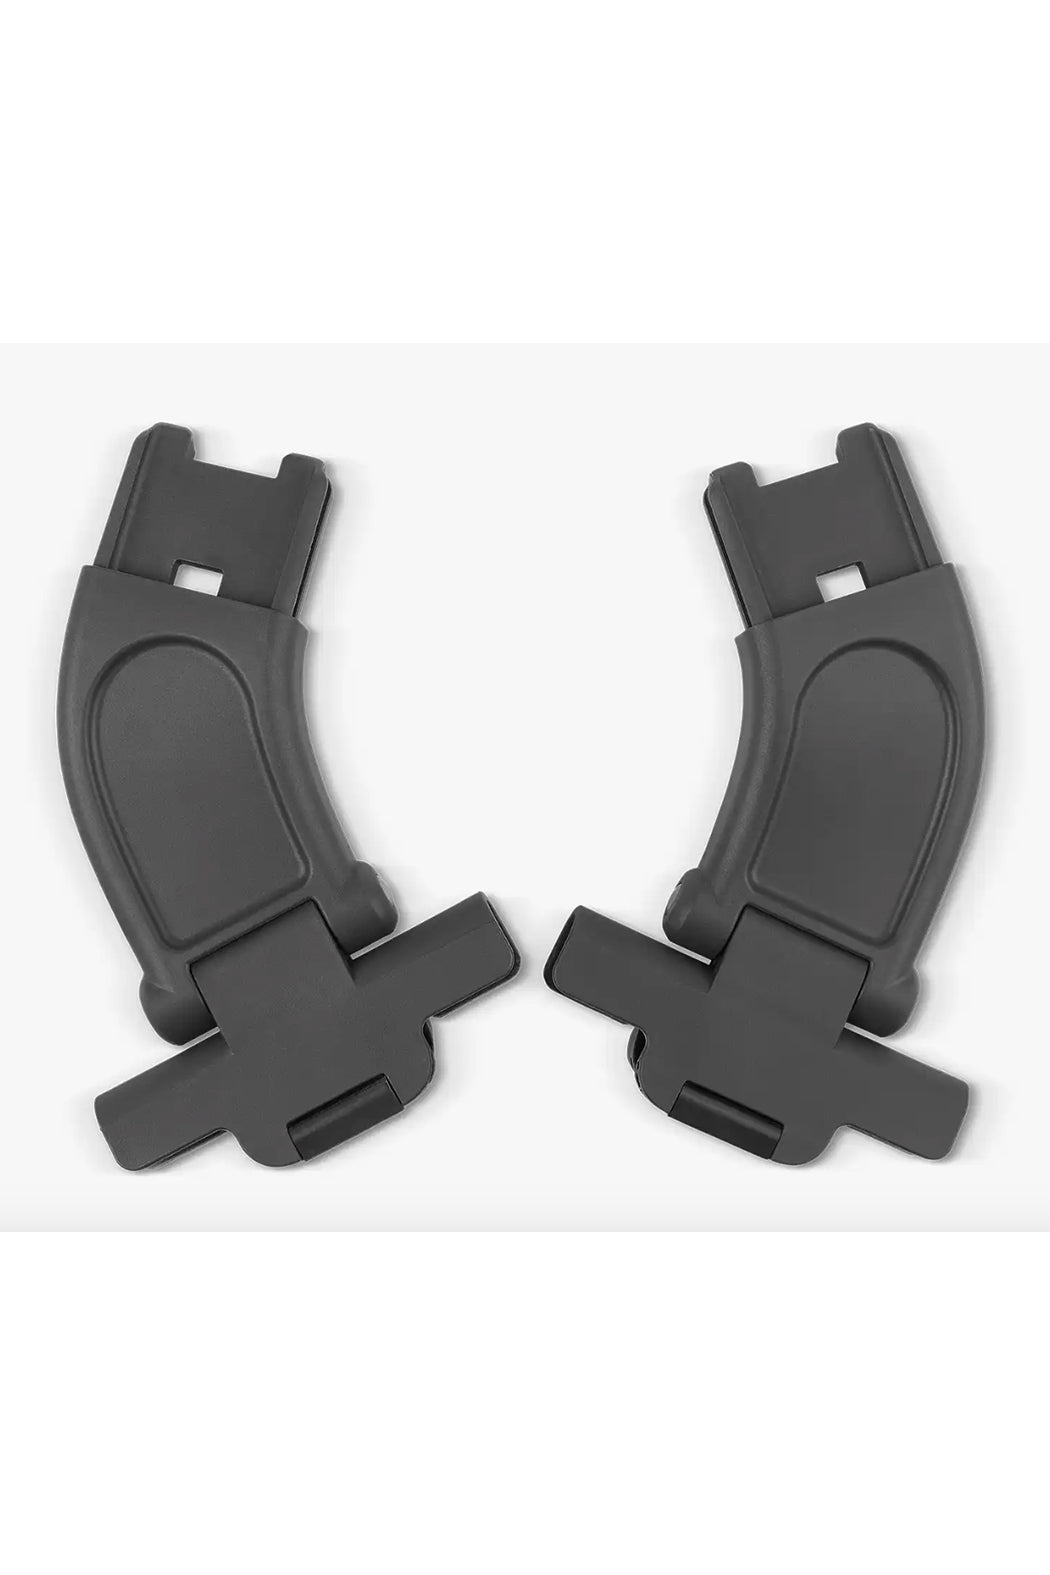 UPPAbaby Adapters for Minu and Minu V2 (Mesa and Bassinet)